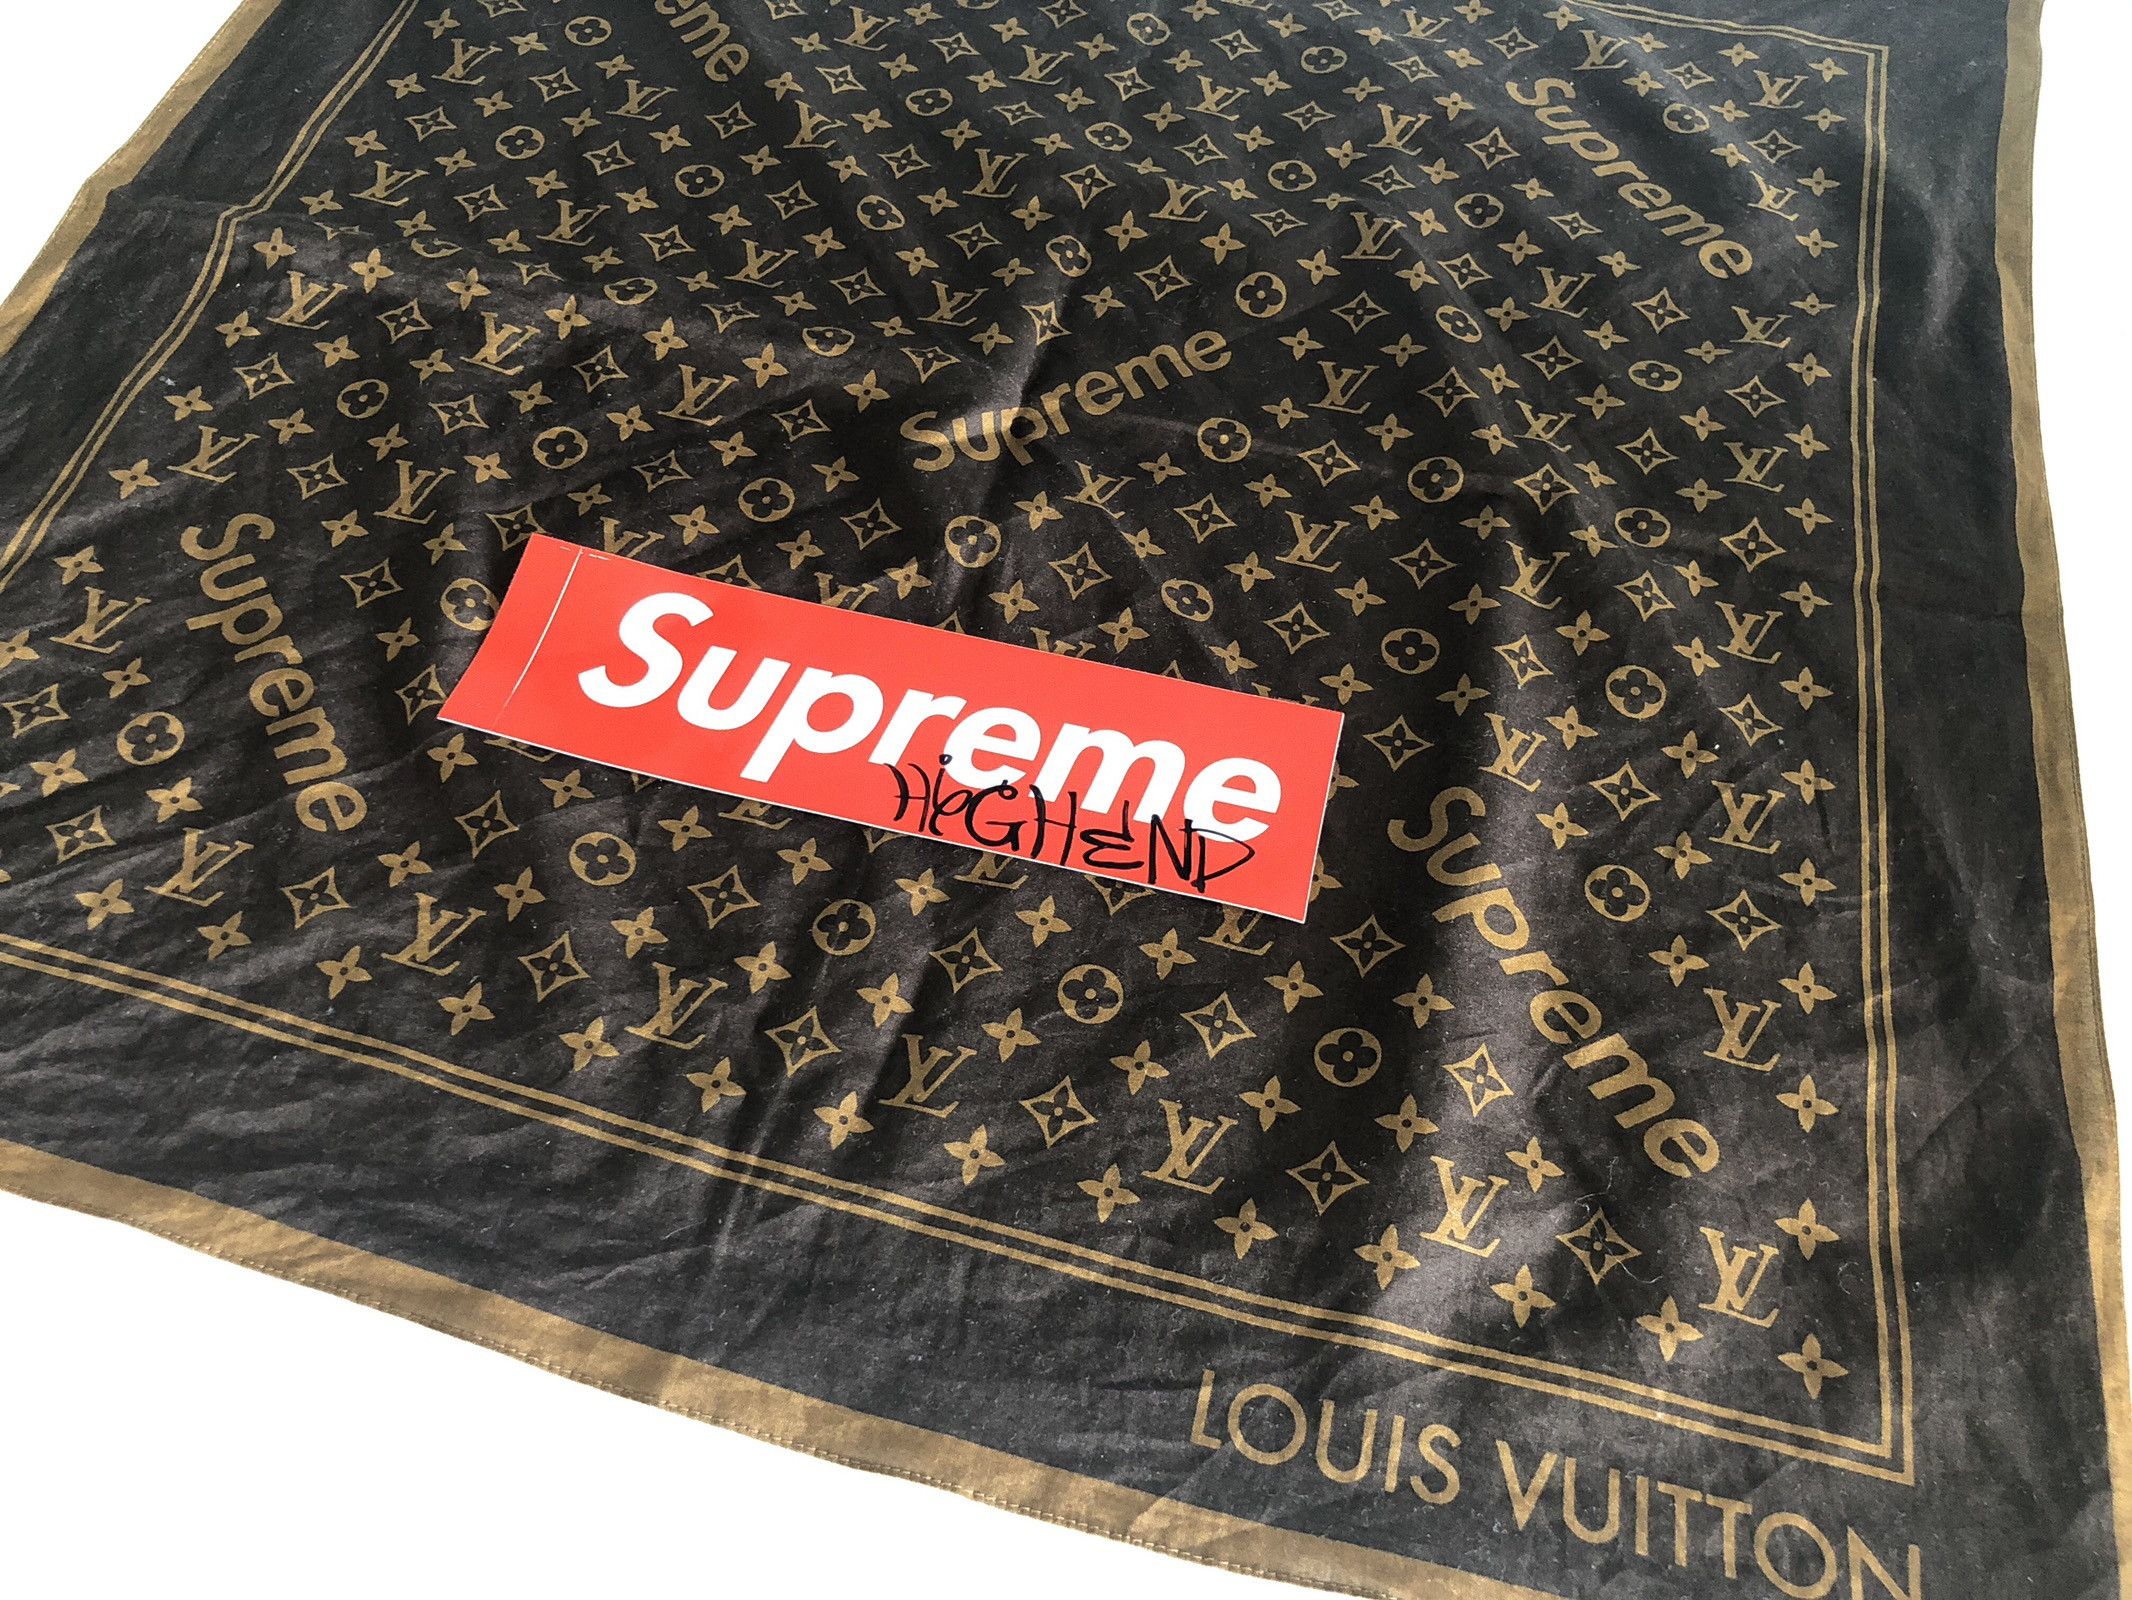 LOUIS VUITTON Monogram Bandanna Brown Limited Edition Supreme  MP1889｜Product Code：2104500361000｜BRAND OFF Online Store